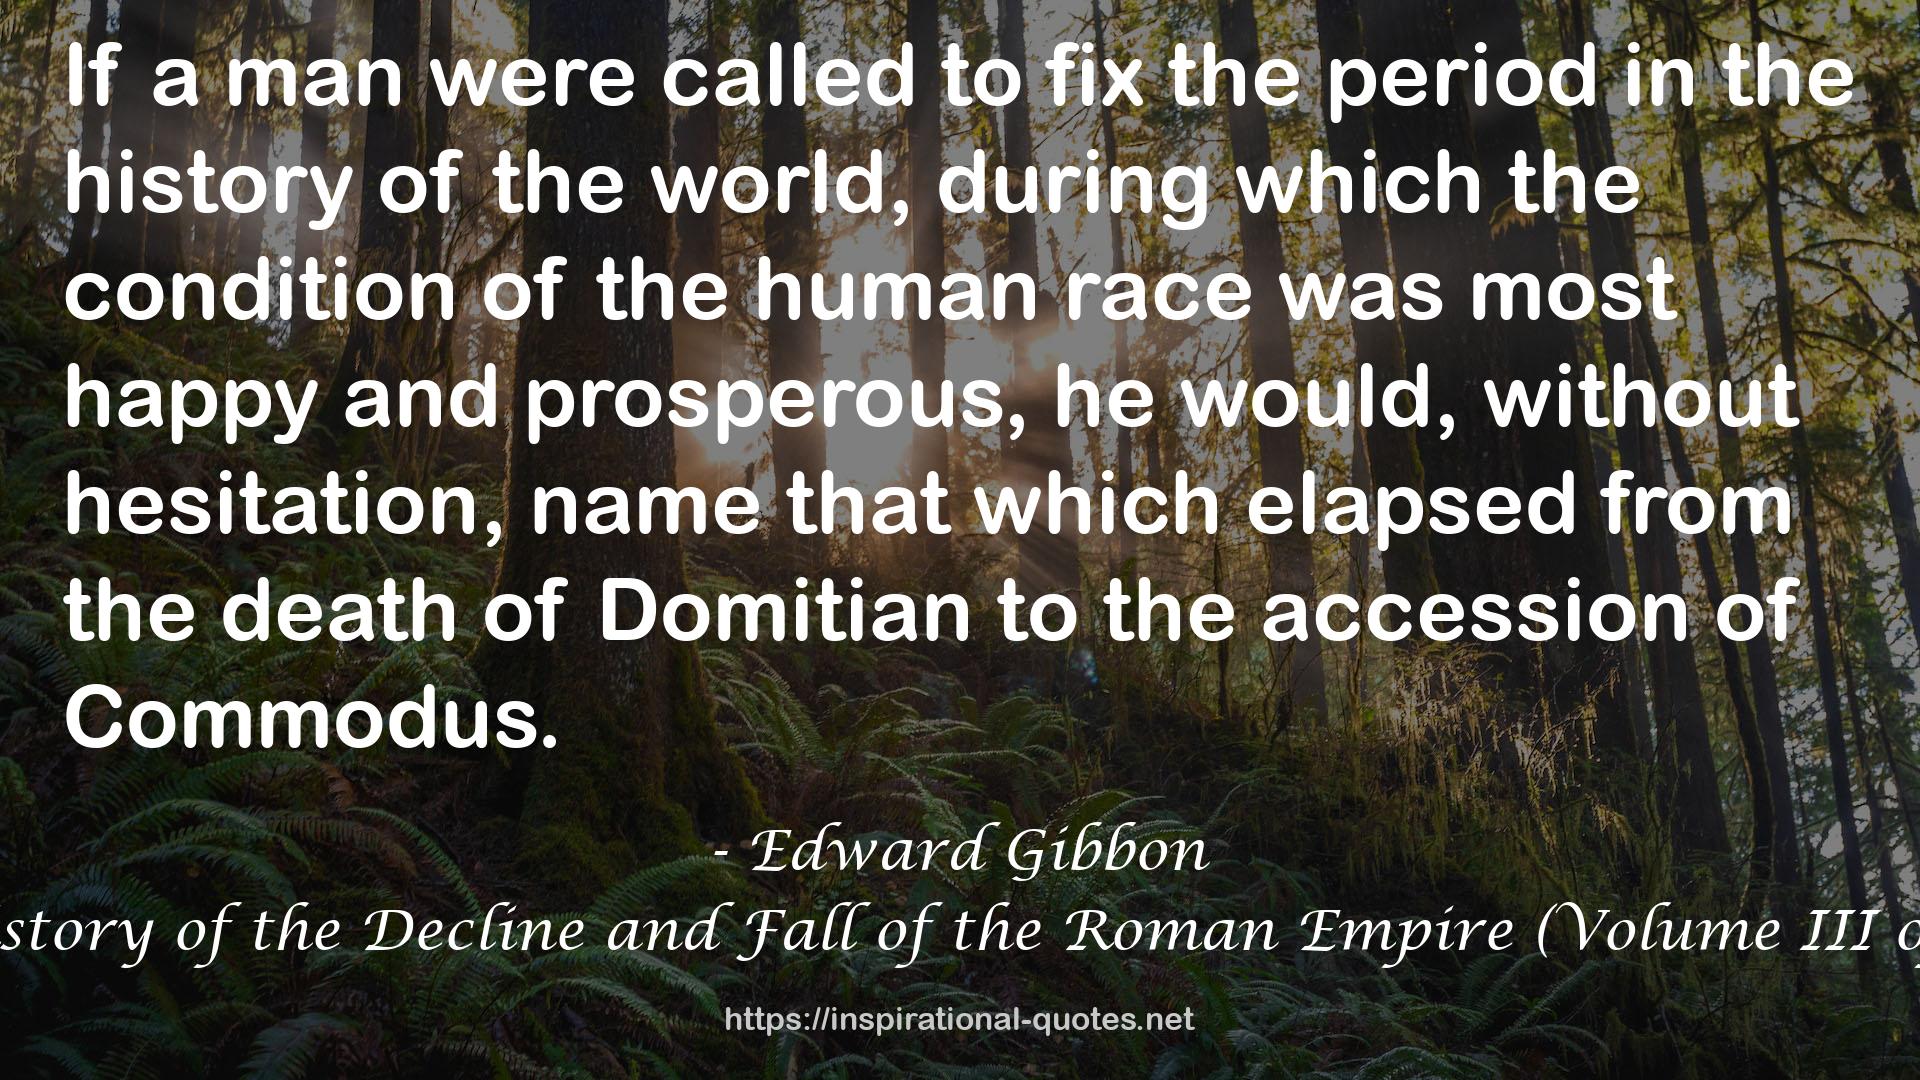 The History of the Decline and Fall of the Roman Empire (Volume III of VI): 3 QUOTES